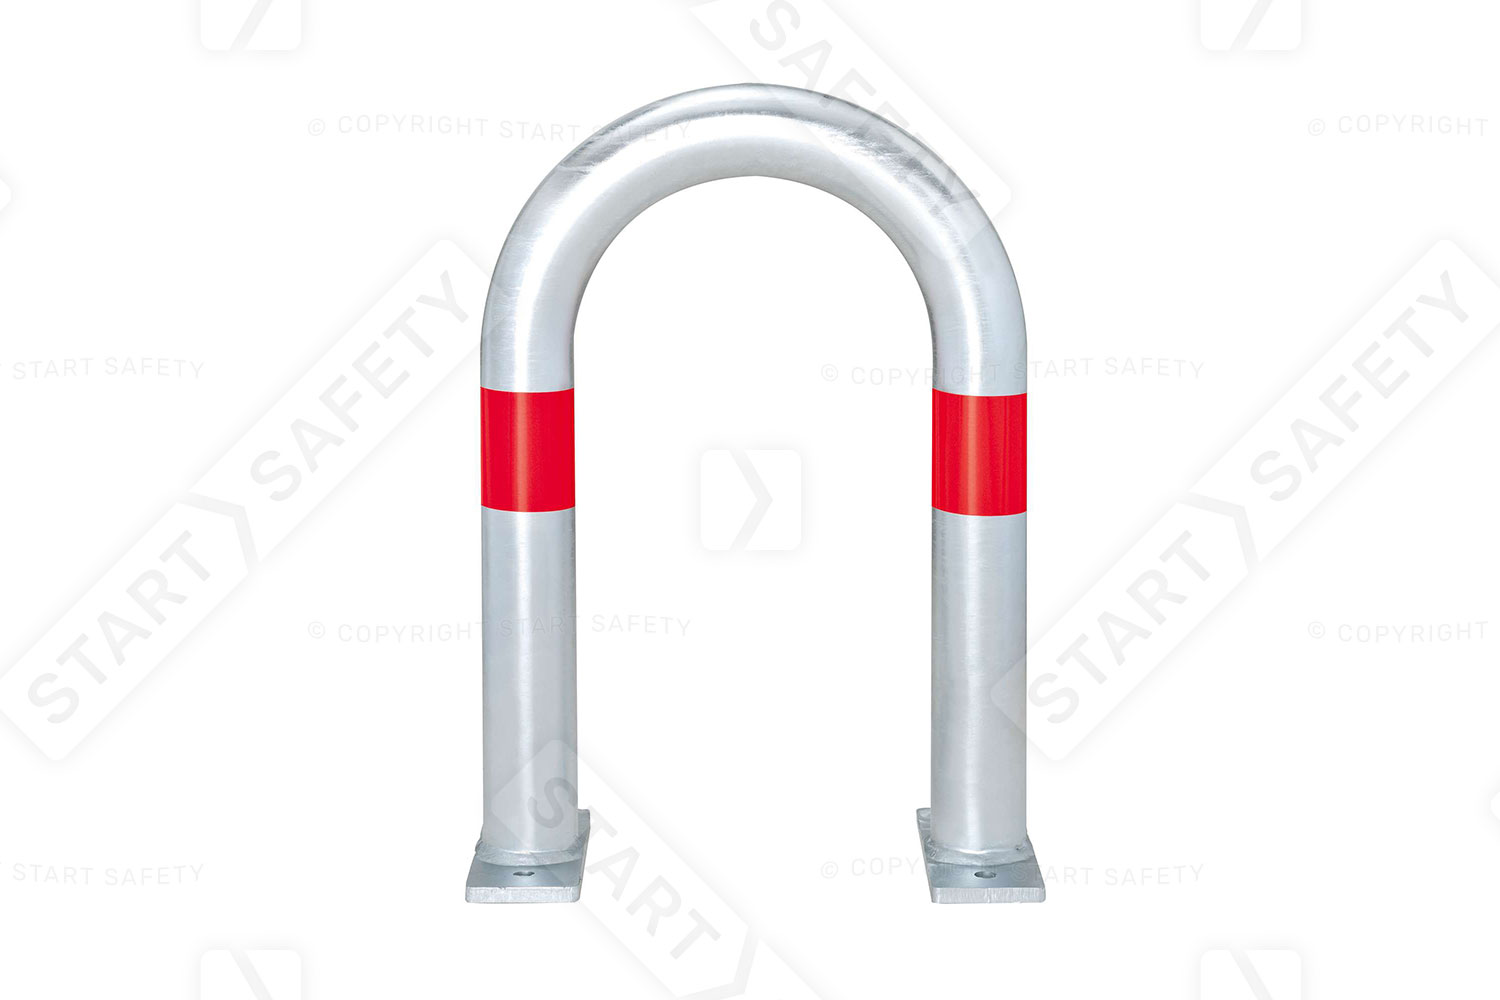 Small Red EV Hoop charging point barrier